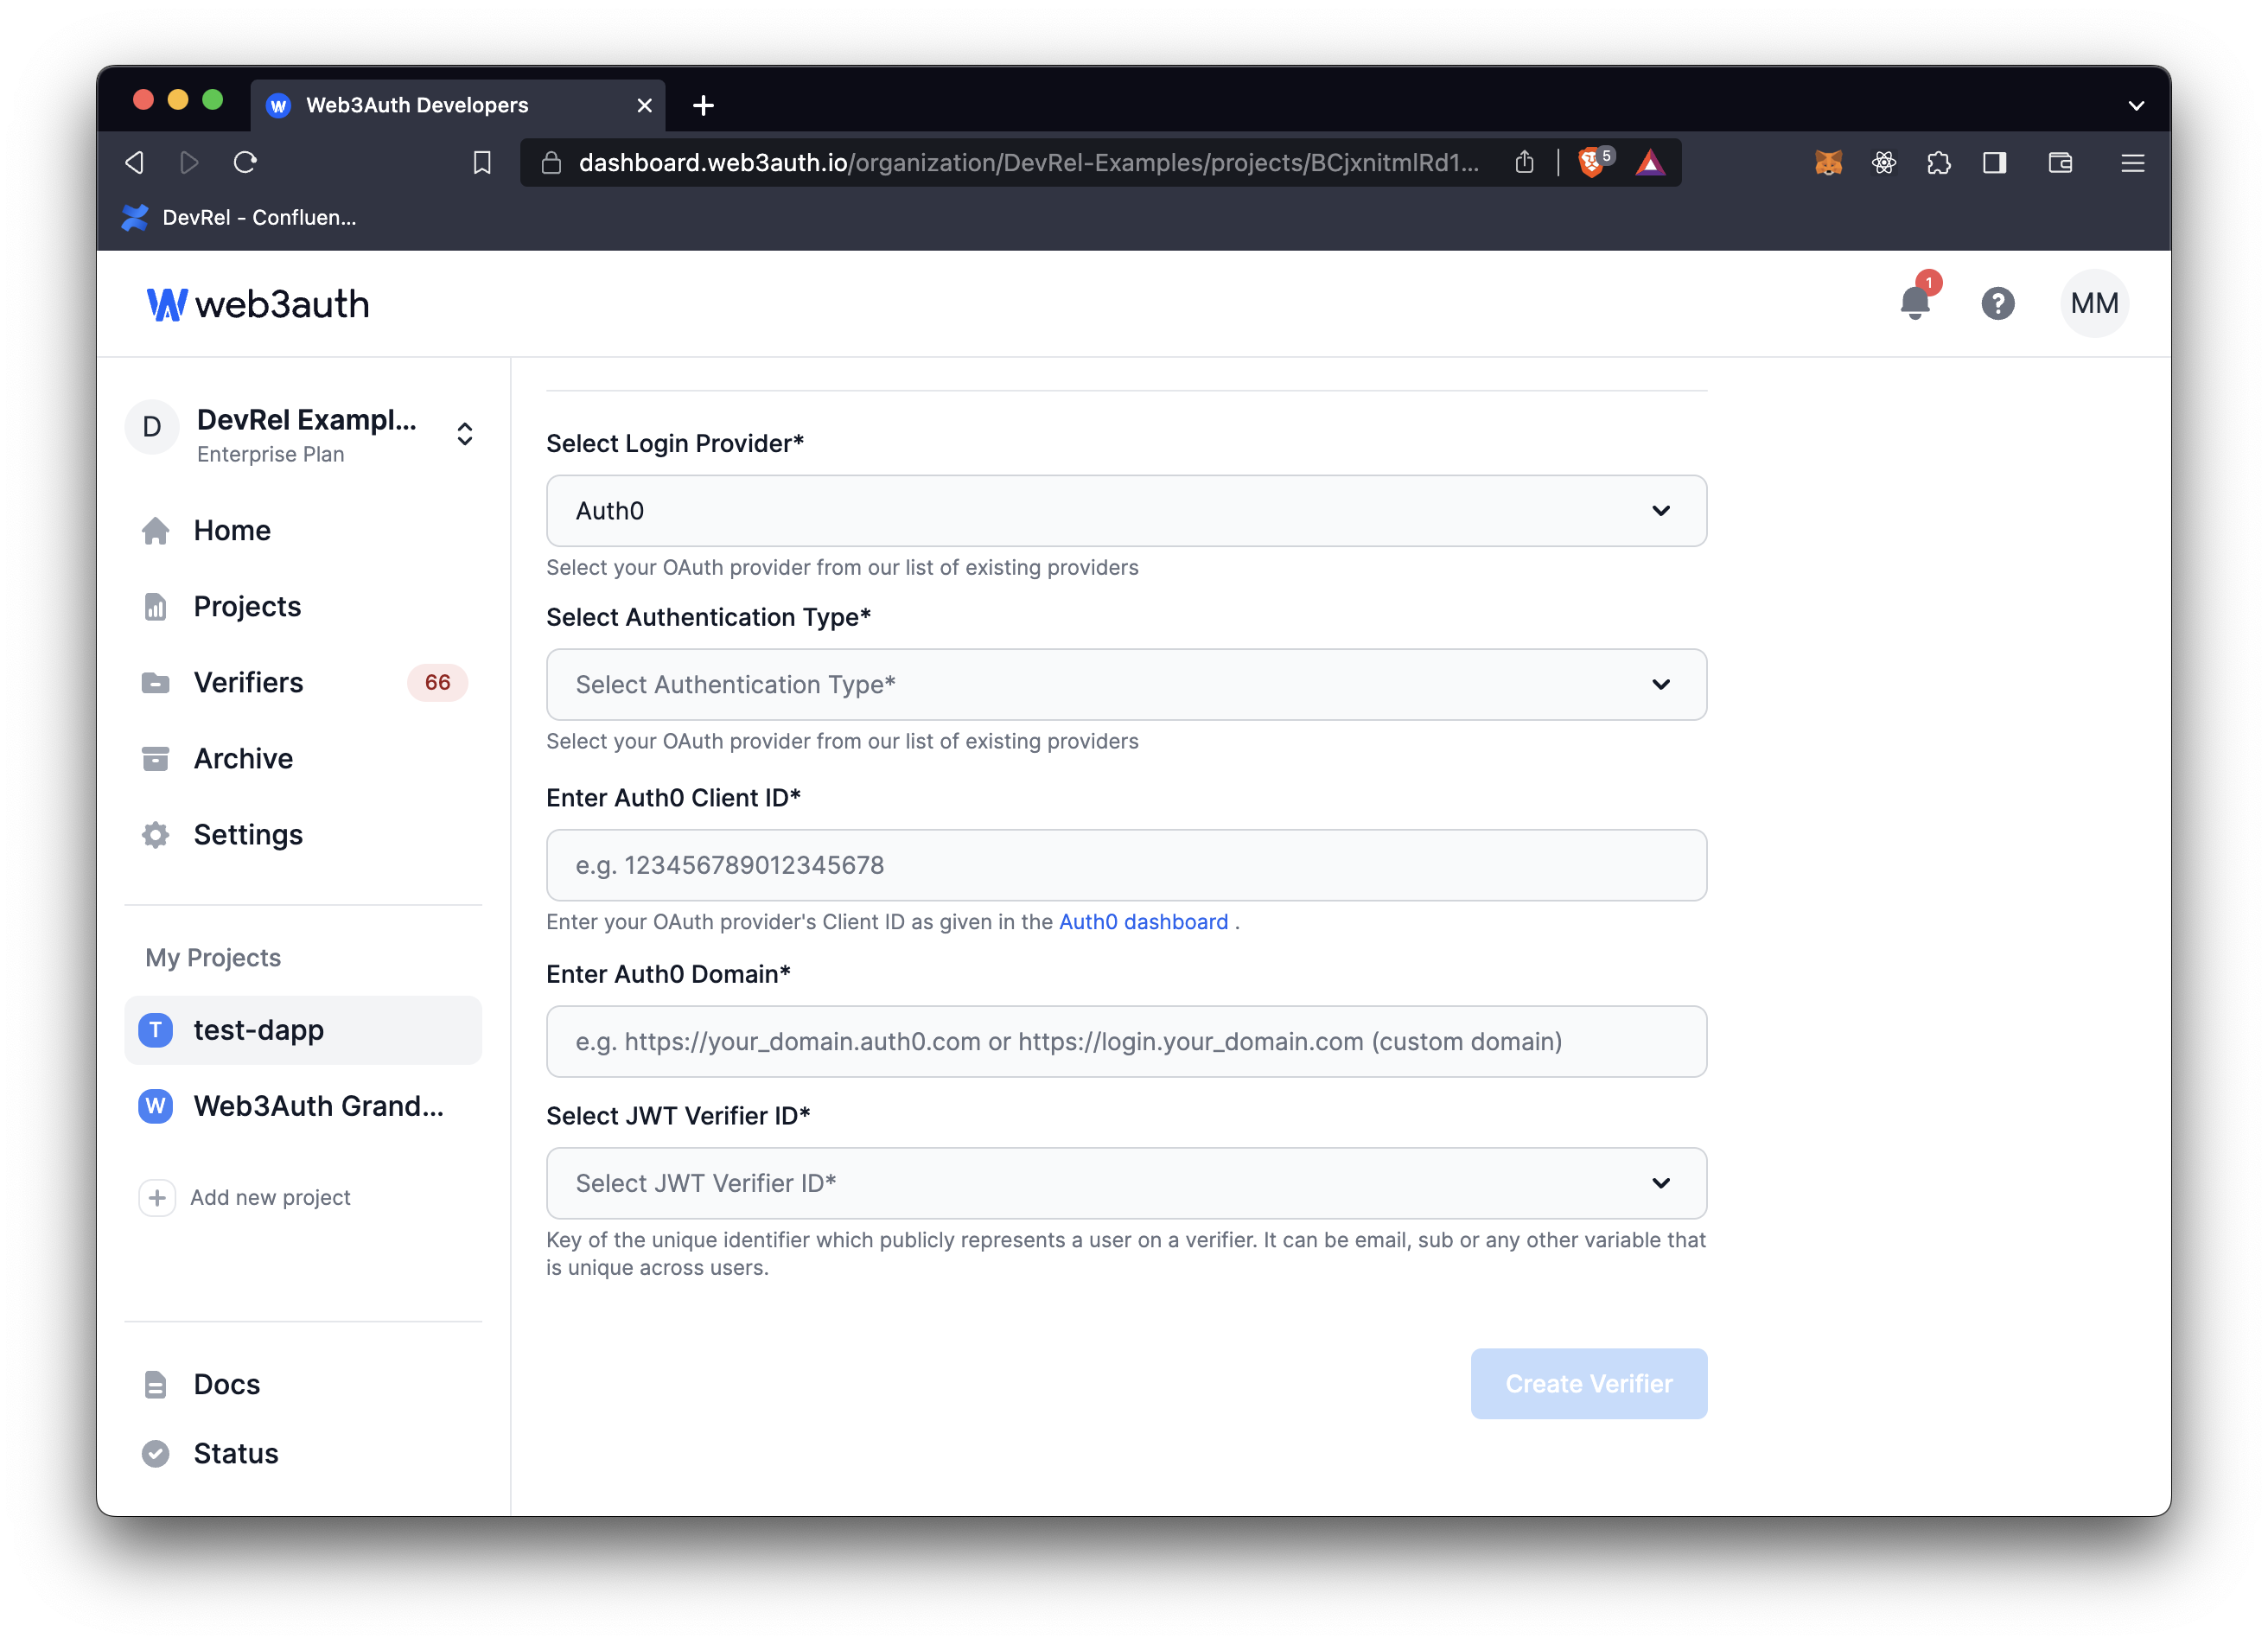 Github - Auth0 Client ID and Auth0 Domain on Web3Auth Dashboard